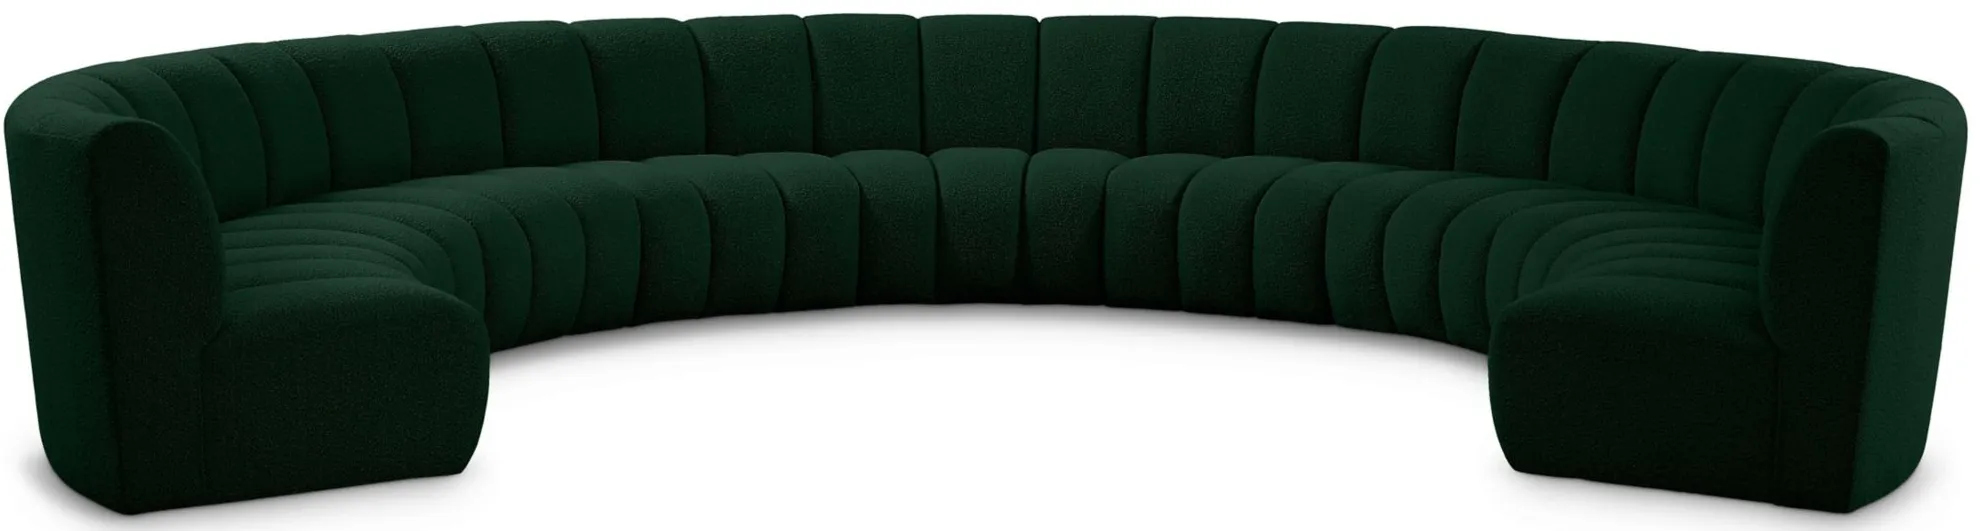 Infinity 9pc. Modular Sectional in Green by Meridian Furniture